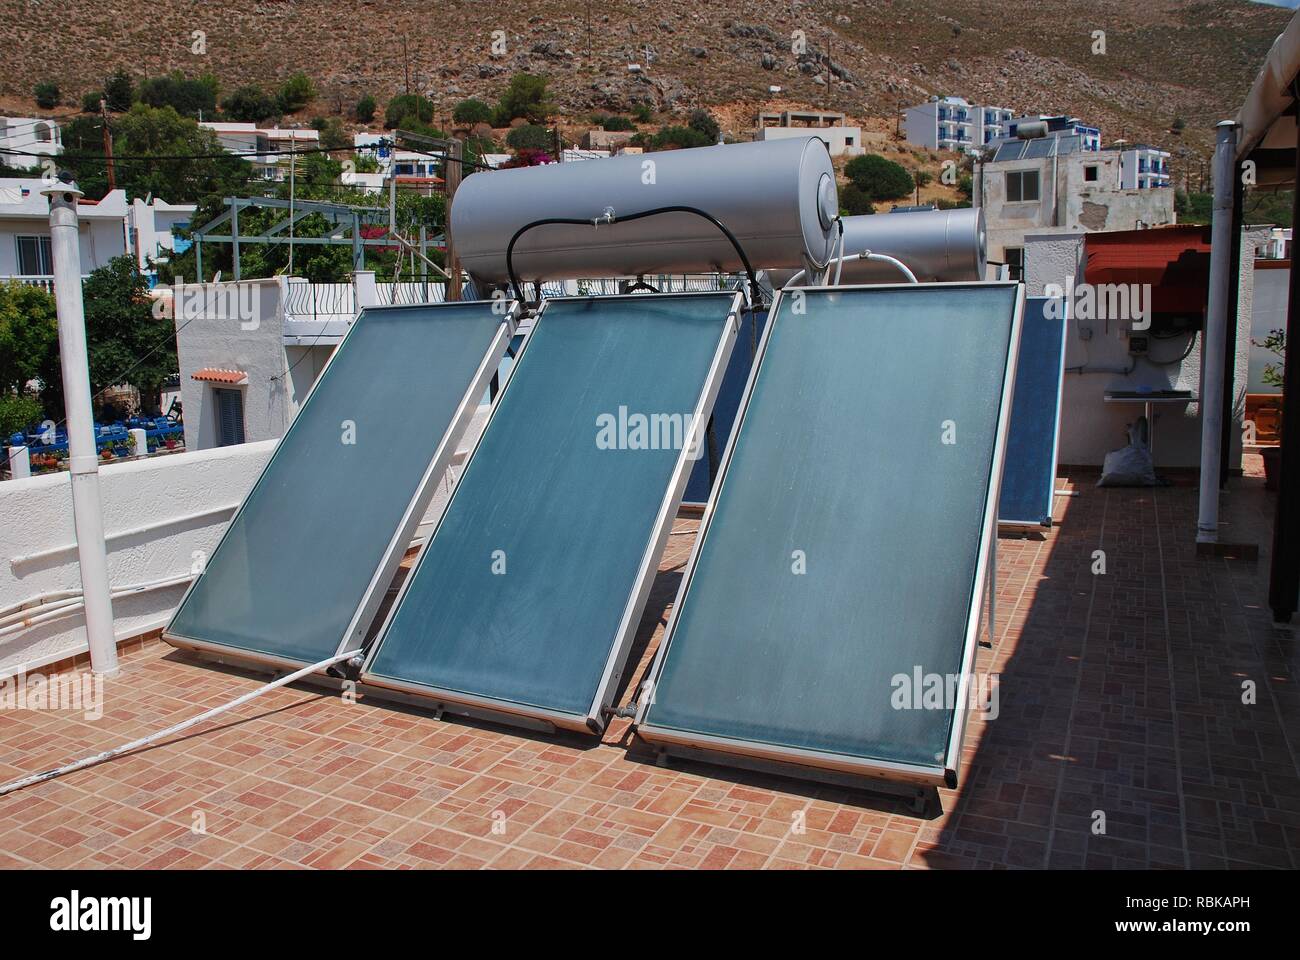 A bank of solar heating panels on a roof top in Livadia on the Greek island of Tilos on June 21, 2018. Stock Photo